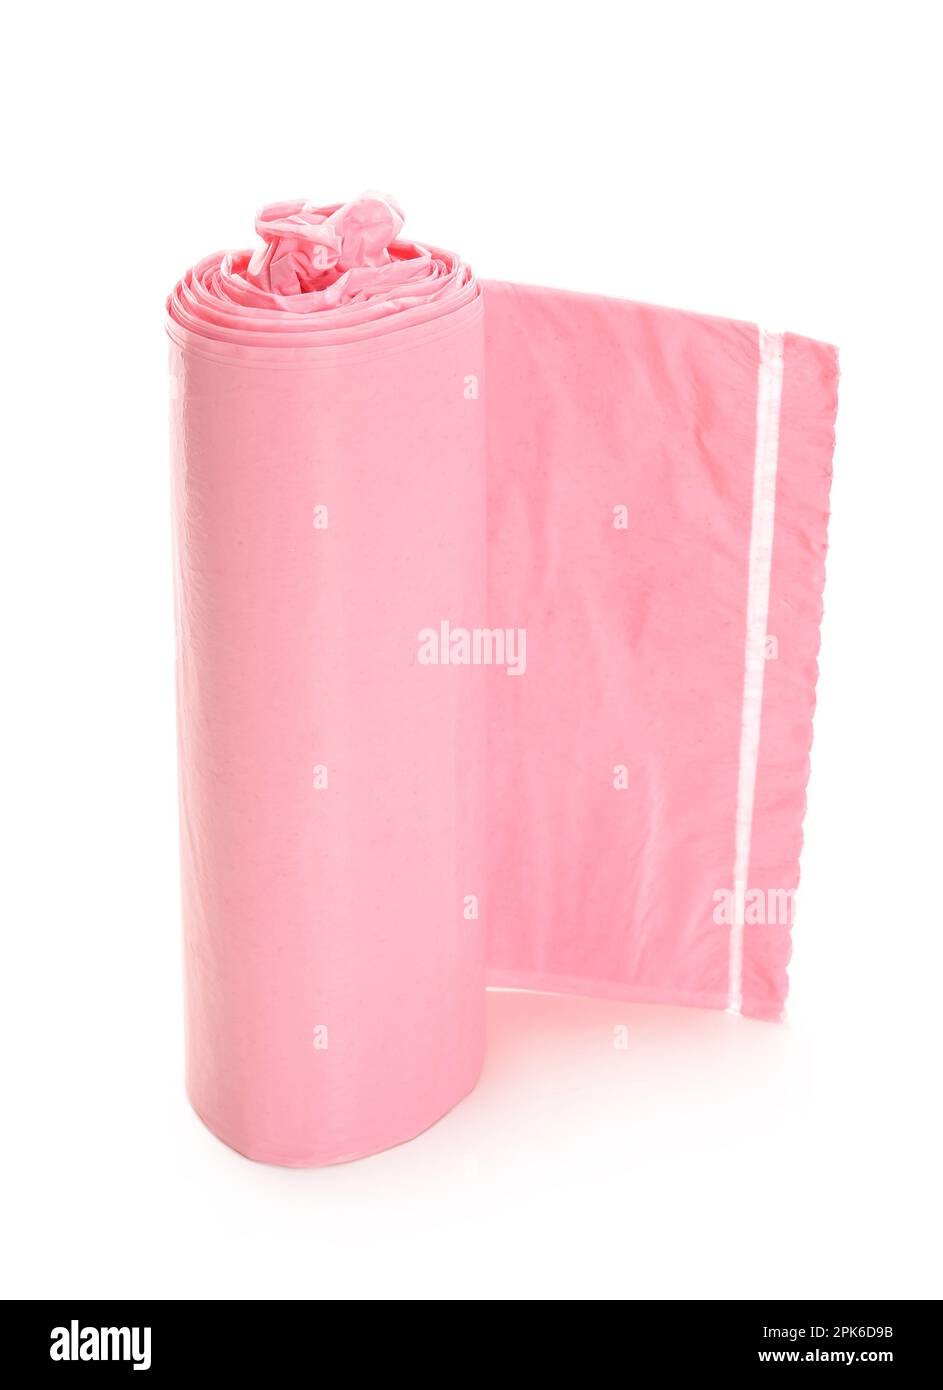 https://c8.alamy.com/comp/2PK6D9B/pink-roll-of-garbage-bags-isolated-on-white-background-2PK6D9B.jpg